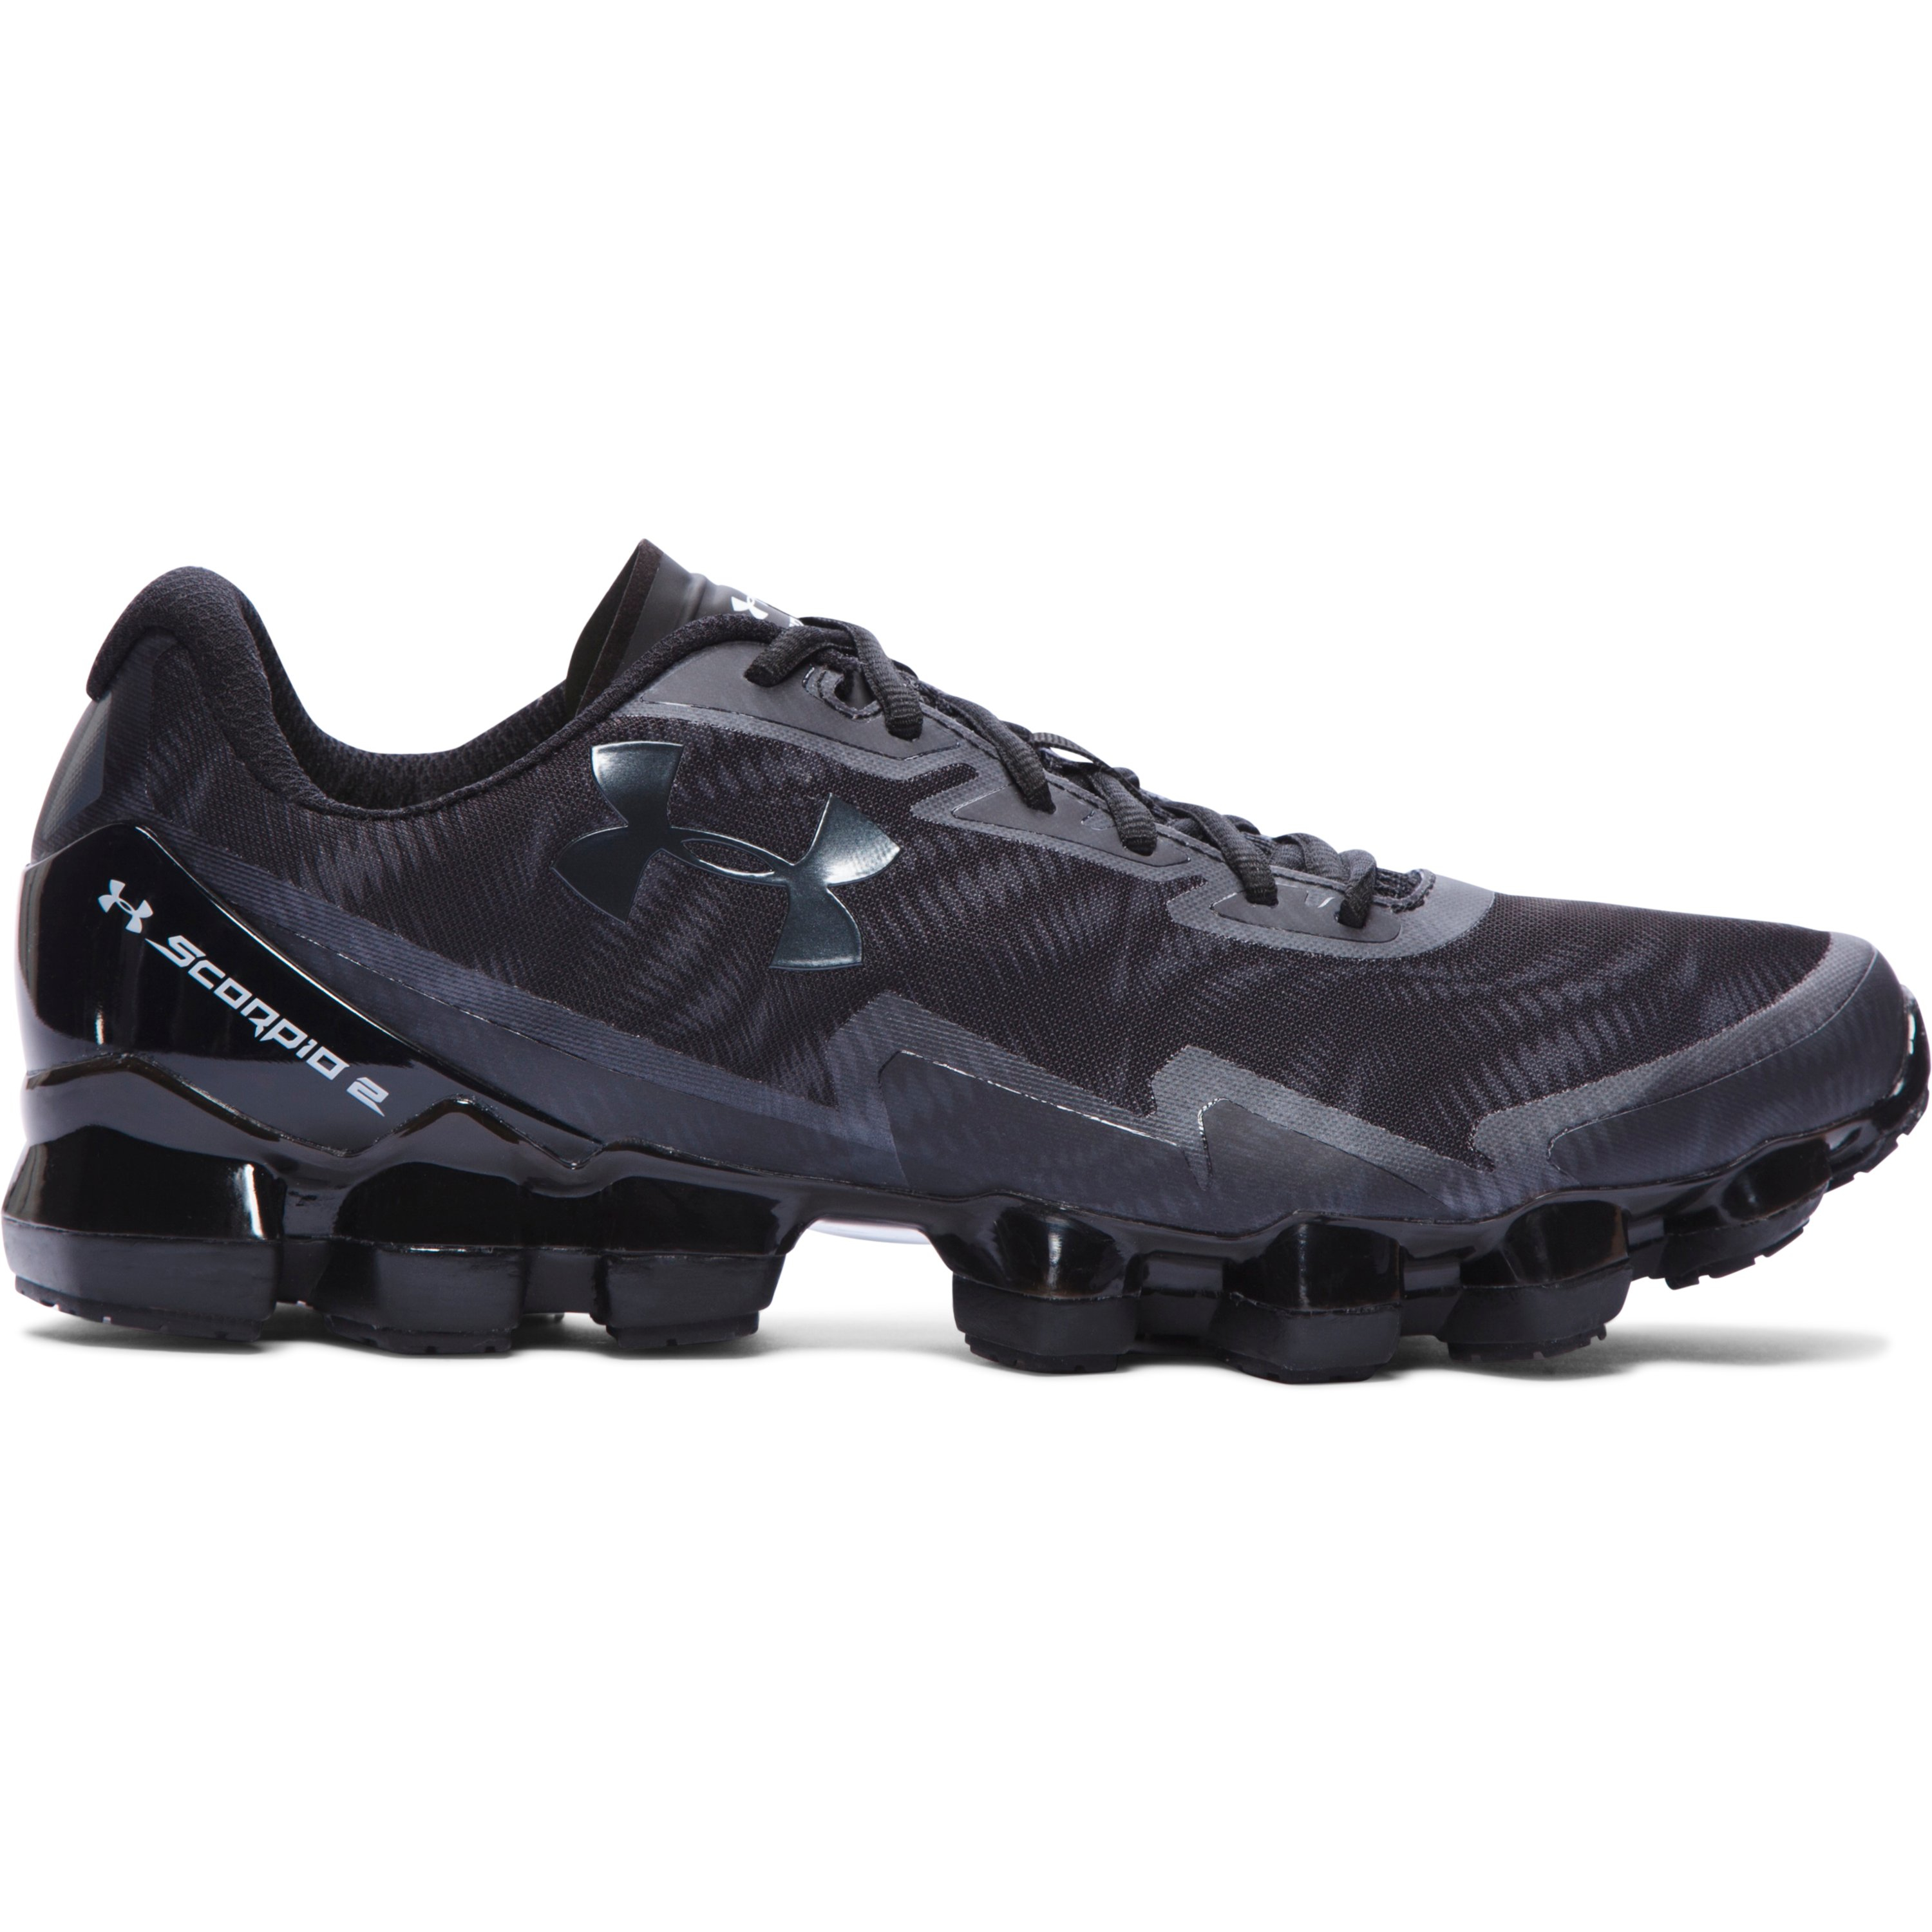 Under Armour Scorpio 2 Men's Black Running Road Sports Shoes Trainers 